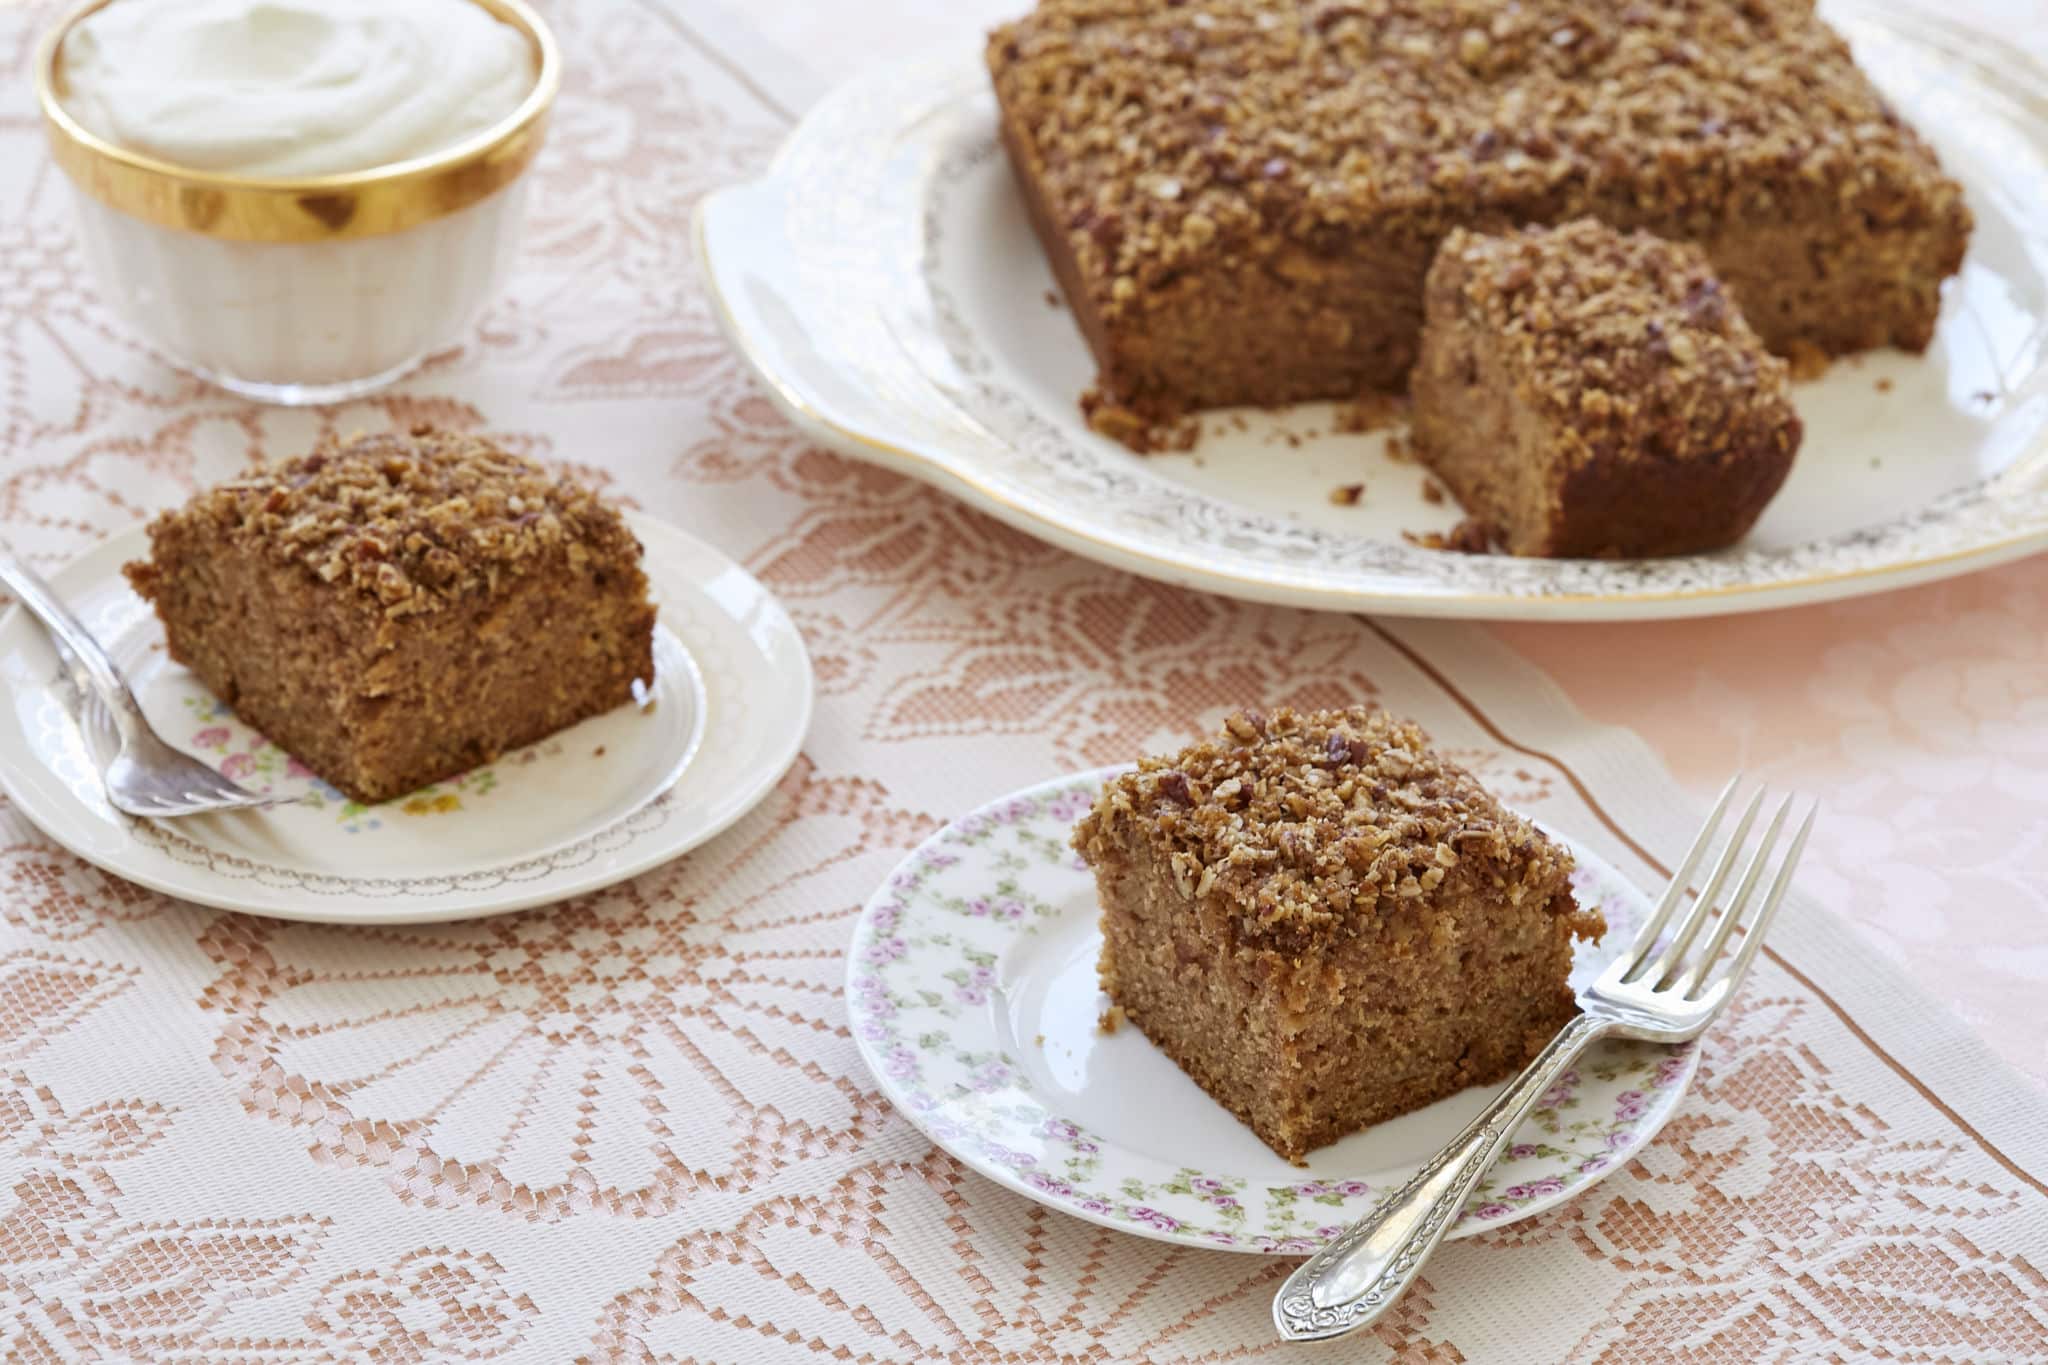 Homemade apple snack cake is cut into separate servings. The apple cake has a crumbly streusel topping.